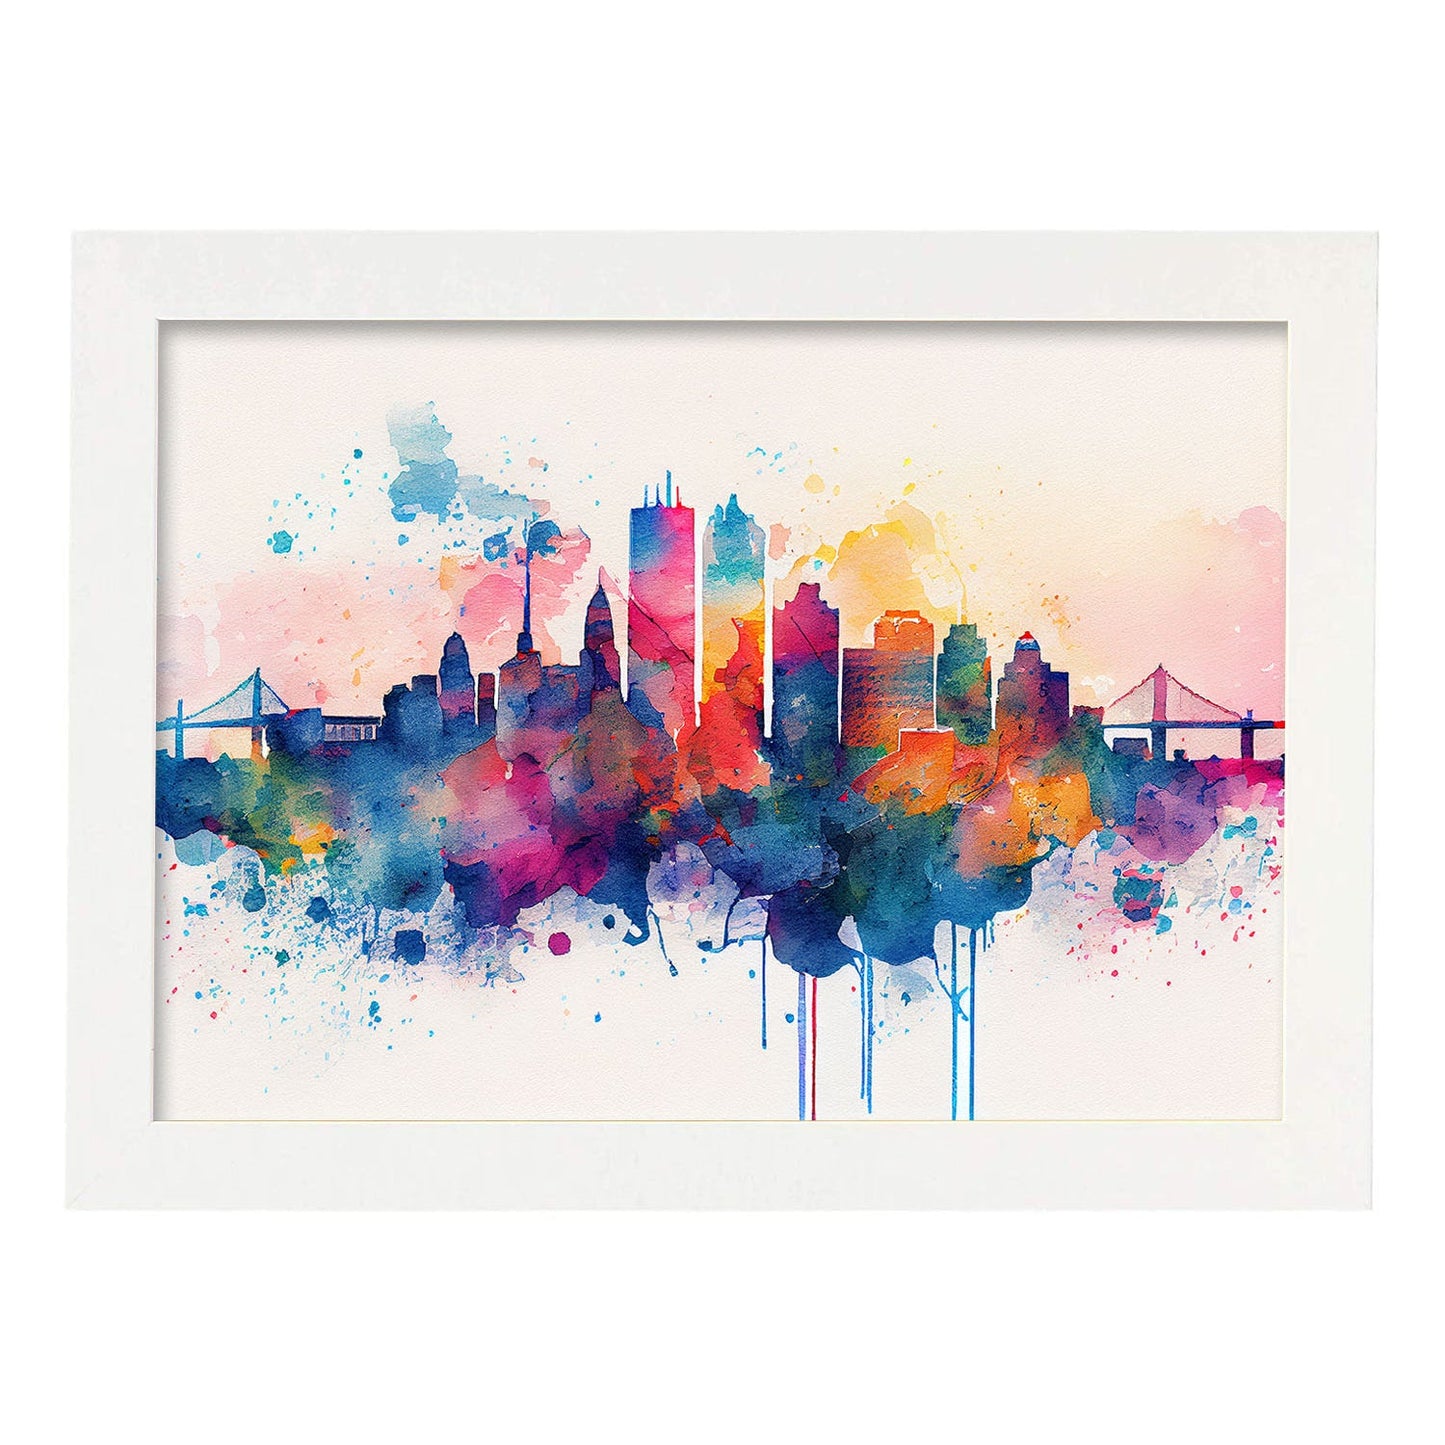 Nacnic watercolor of a skyline of the city of Boston_1. Aesthetic Wall Art Prints for Bedroom or Living Room Design.-Artwork-Nacnic-A4-Marco Blanco-Nacnic Estudio SL